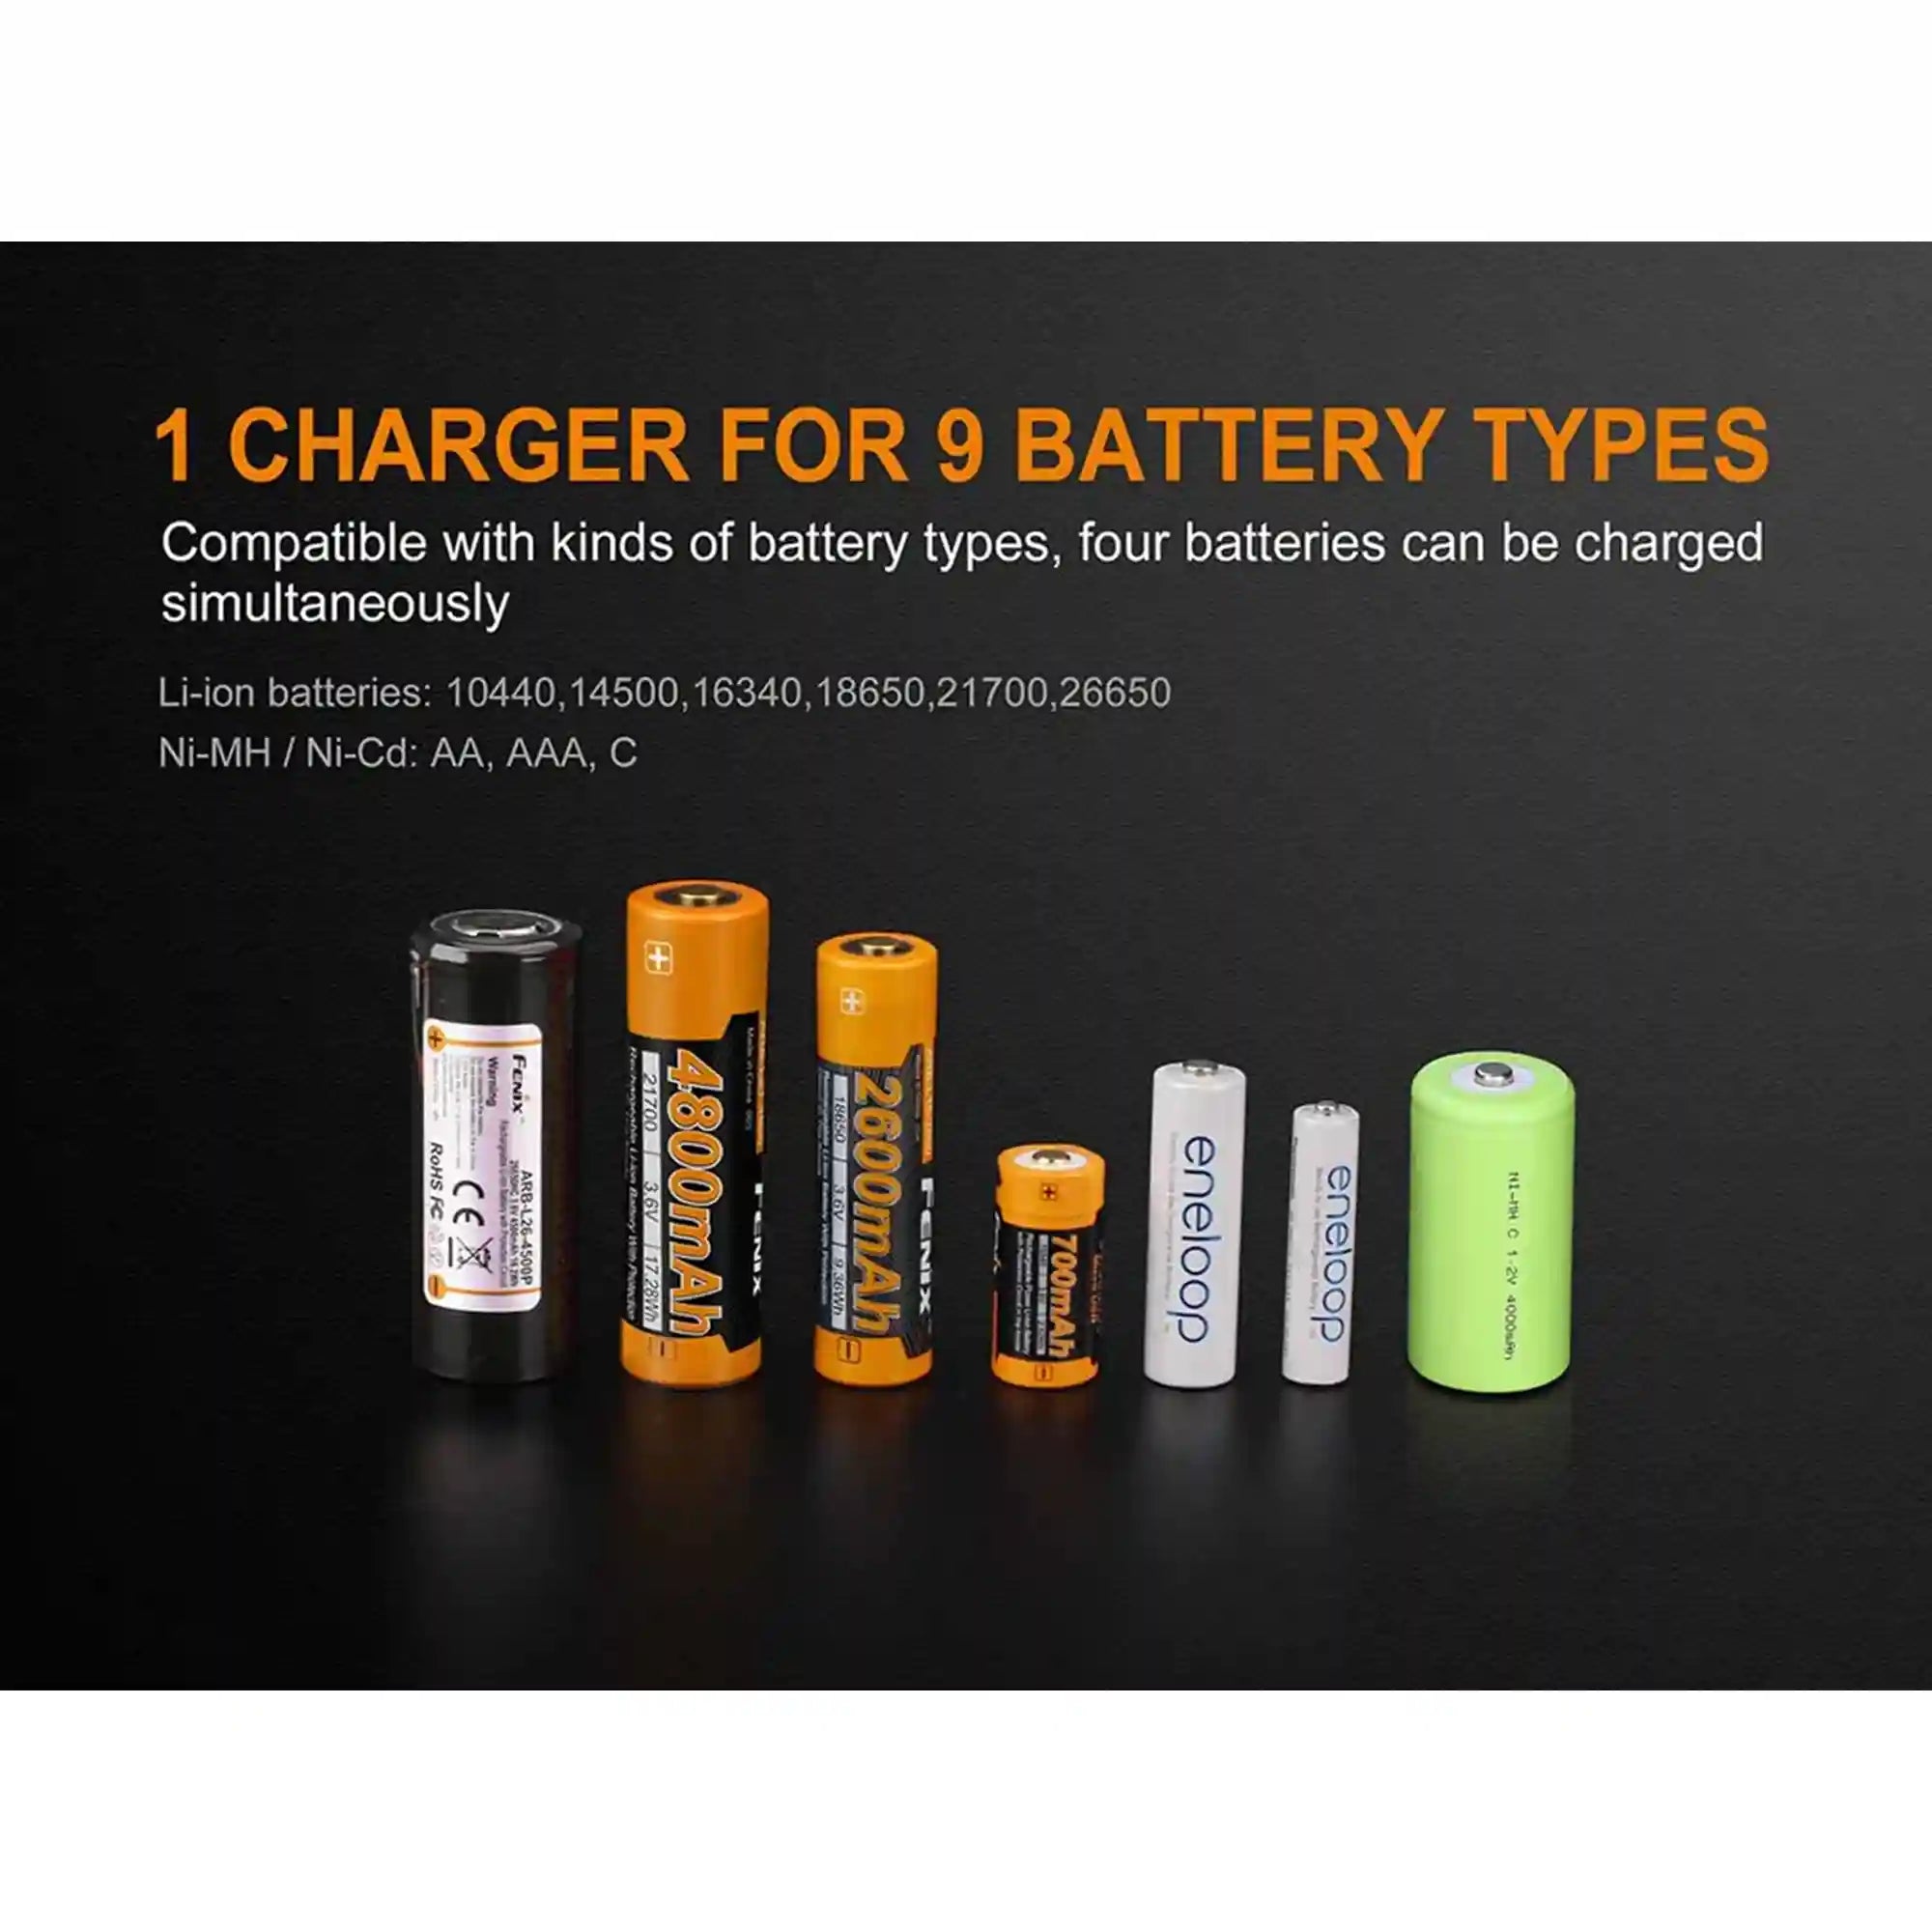 ARE-A4 Battery Charger